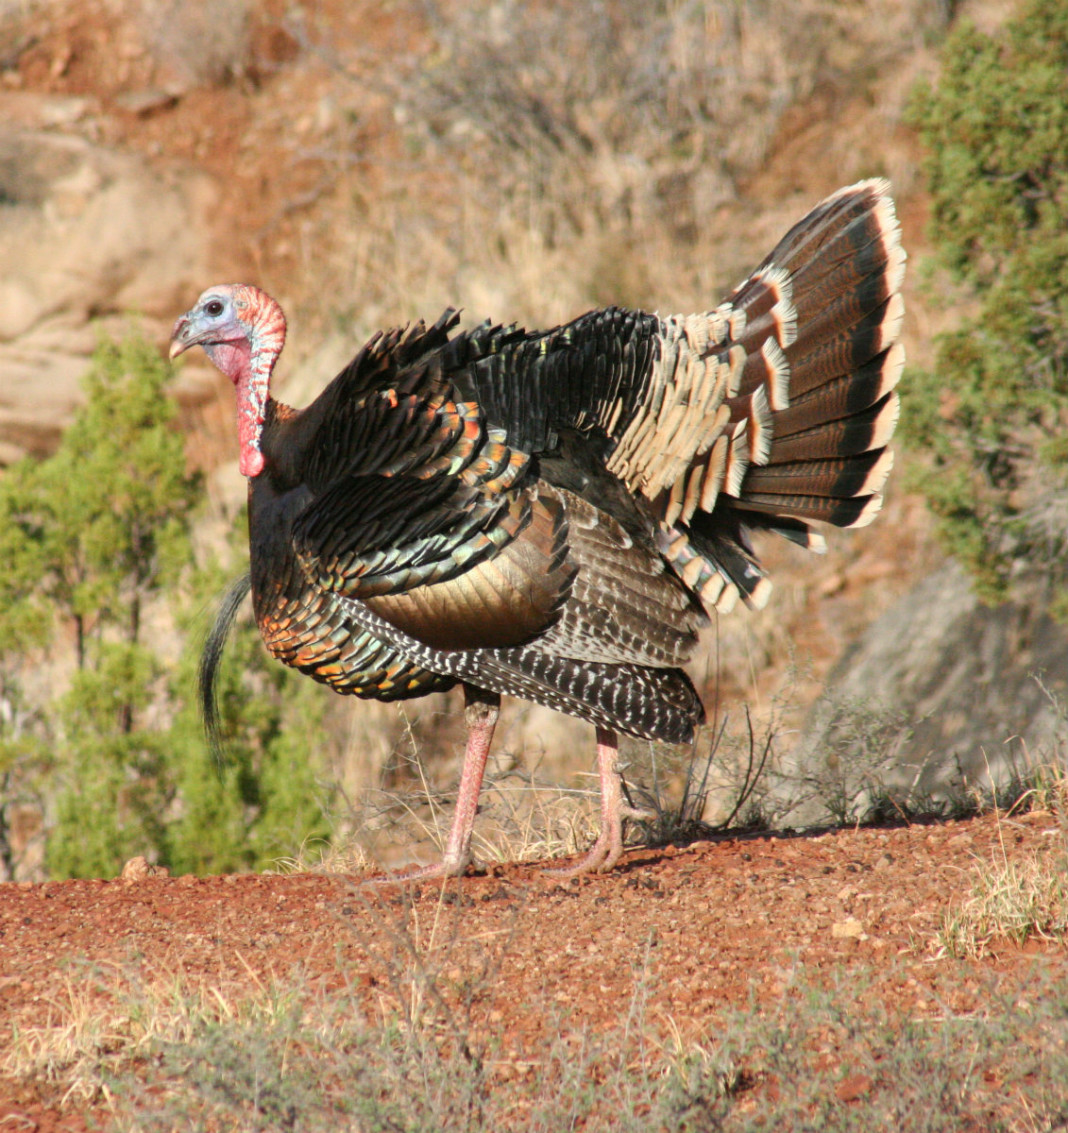 Turkeys have excellent eyesight, which means camouflage is vital in spring hunting situations.